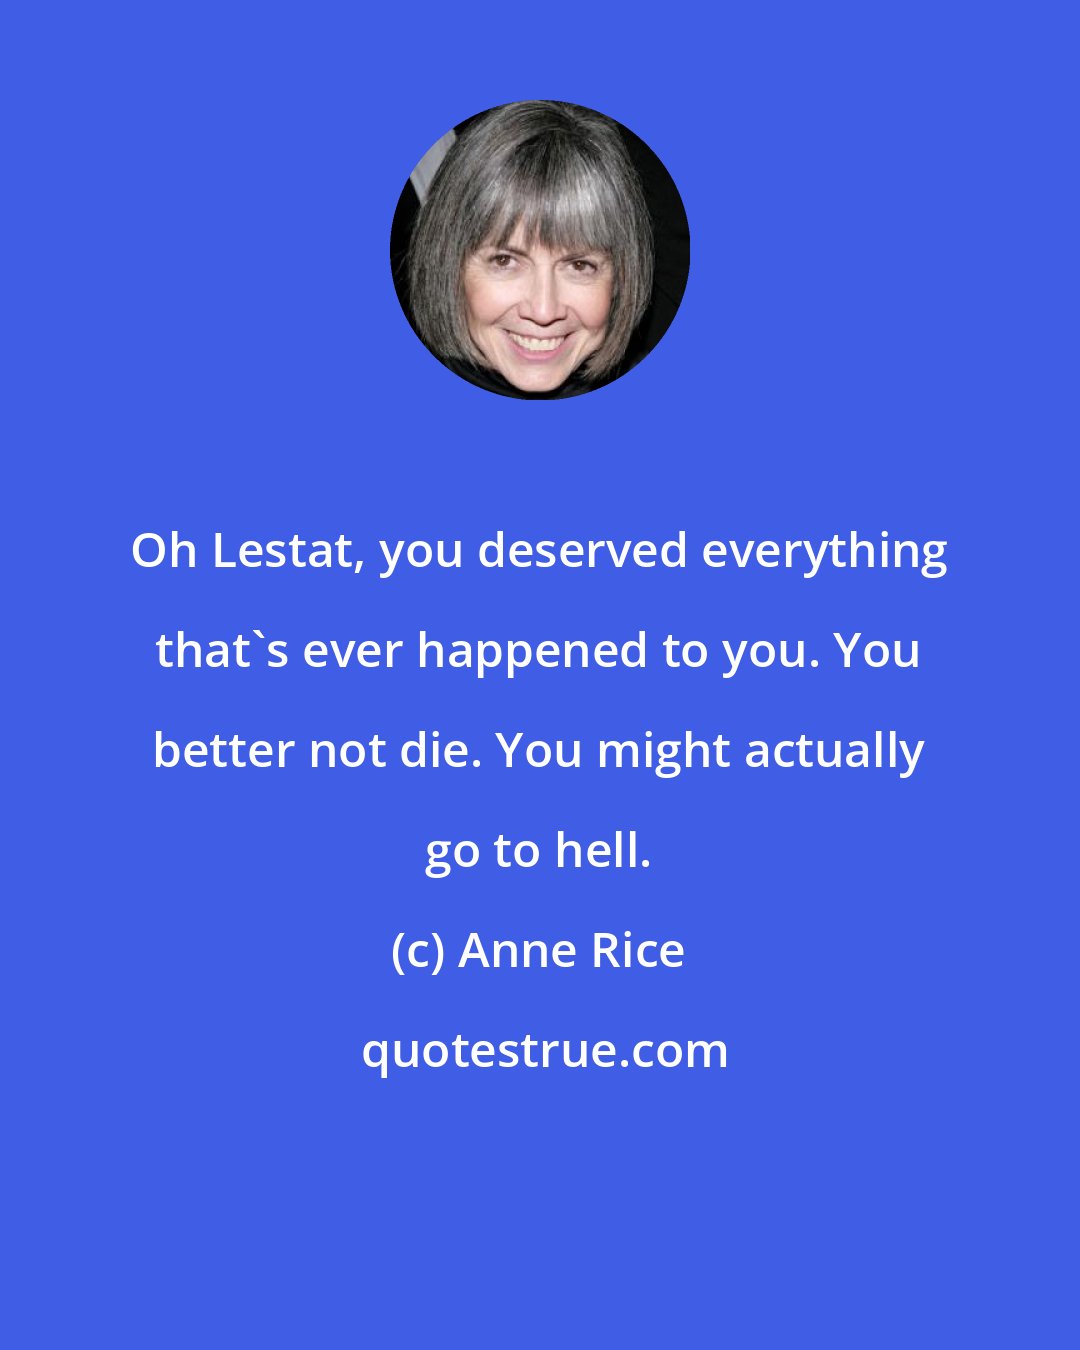 Anne Rice: Oh Lestat, you deserved everything that's ever happened to you. You better not die. You might actually go to hell.